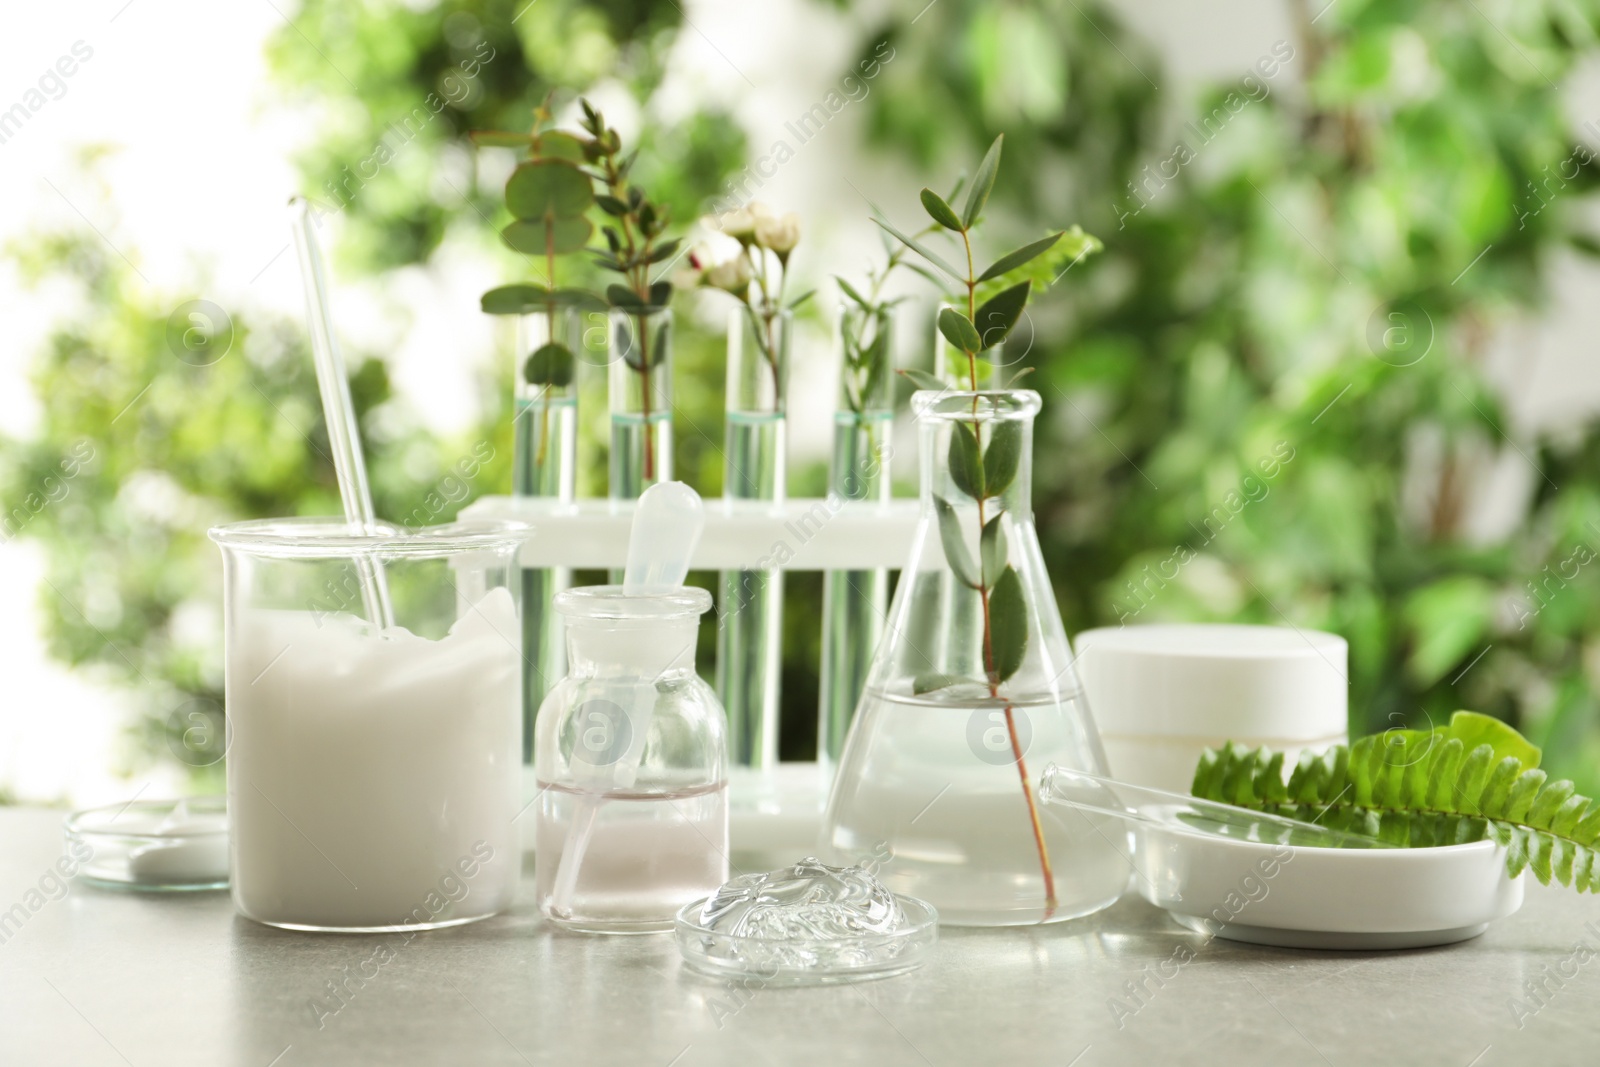 Photo of Natural ingredients for cosmetic products and laboratory glassware on grey table against blurred green background